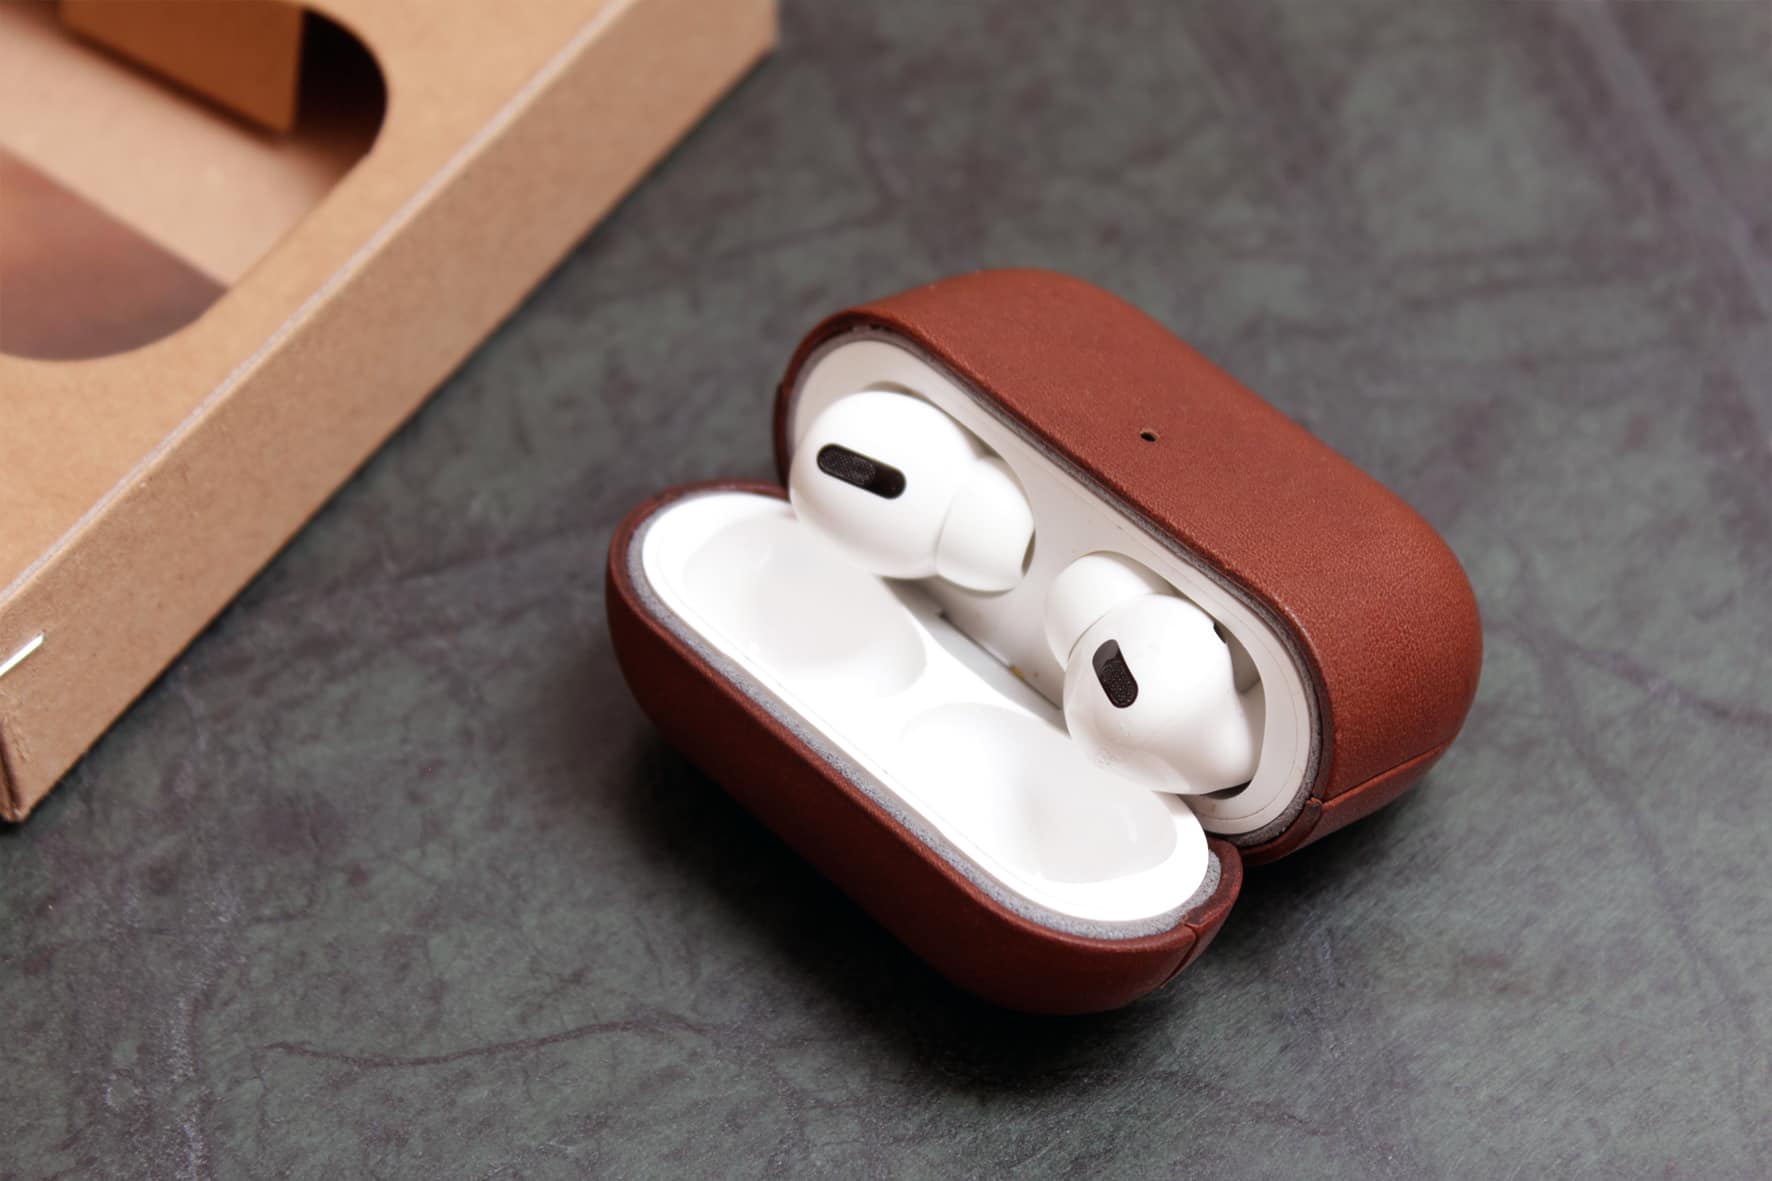 Leather case for Apple AirPod Pro headphones